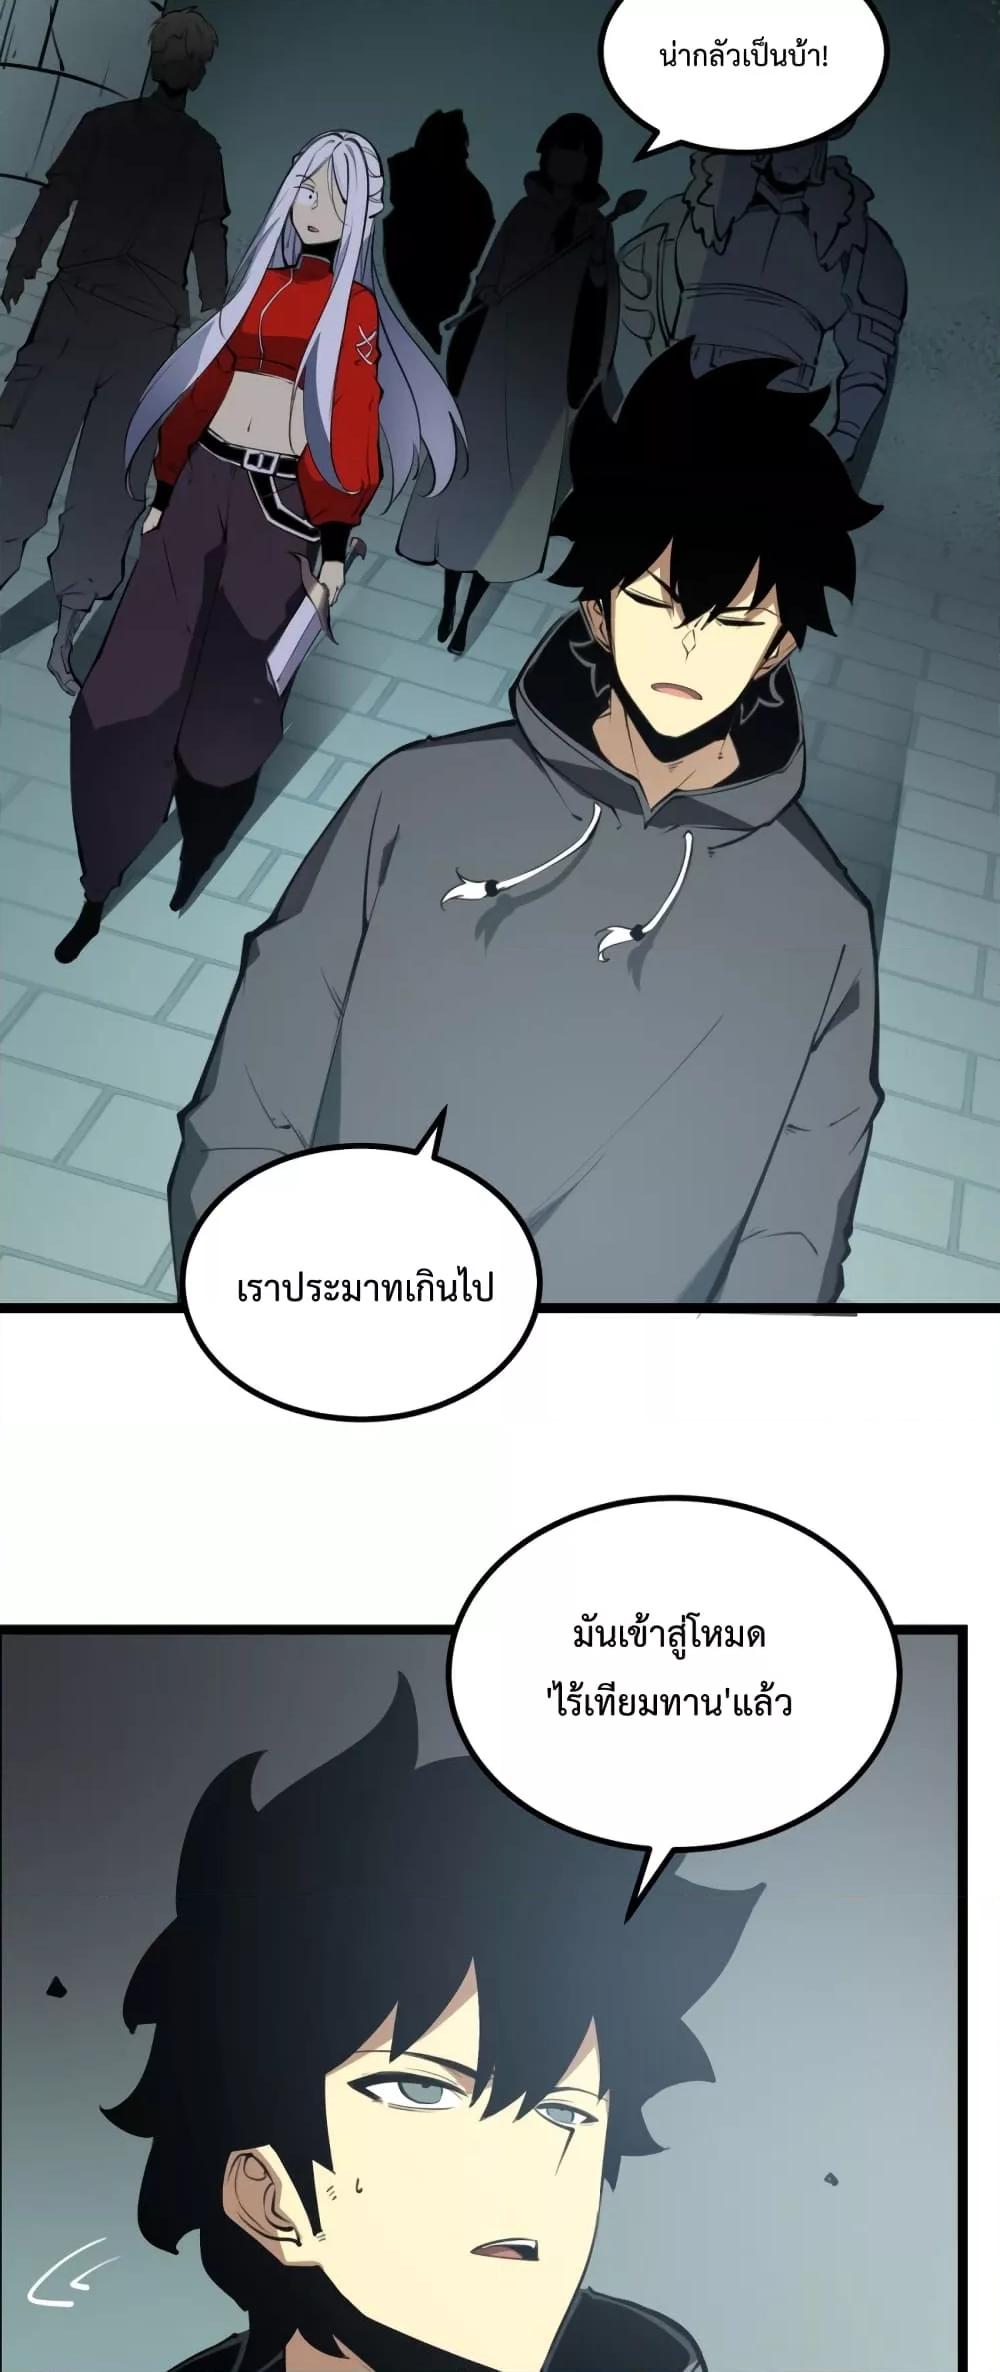 I Became The King by Scavenging โ€“ เนเธเนเธฅเน เน€เธฅเน€เธงเนเธฅเธฅเธฃเธดเนเธ เธ•เธญเธเธ—เธตเน 8 (38)